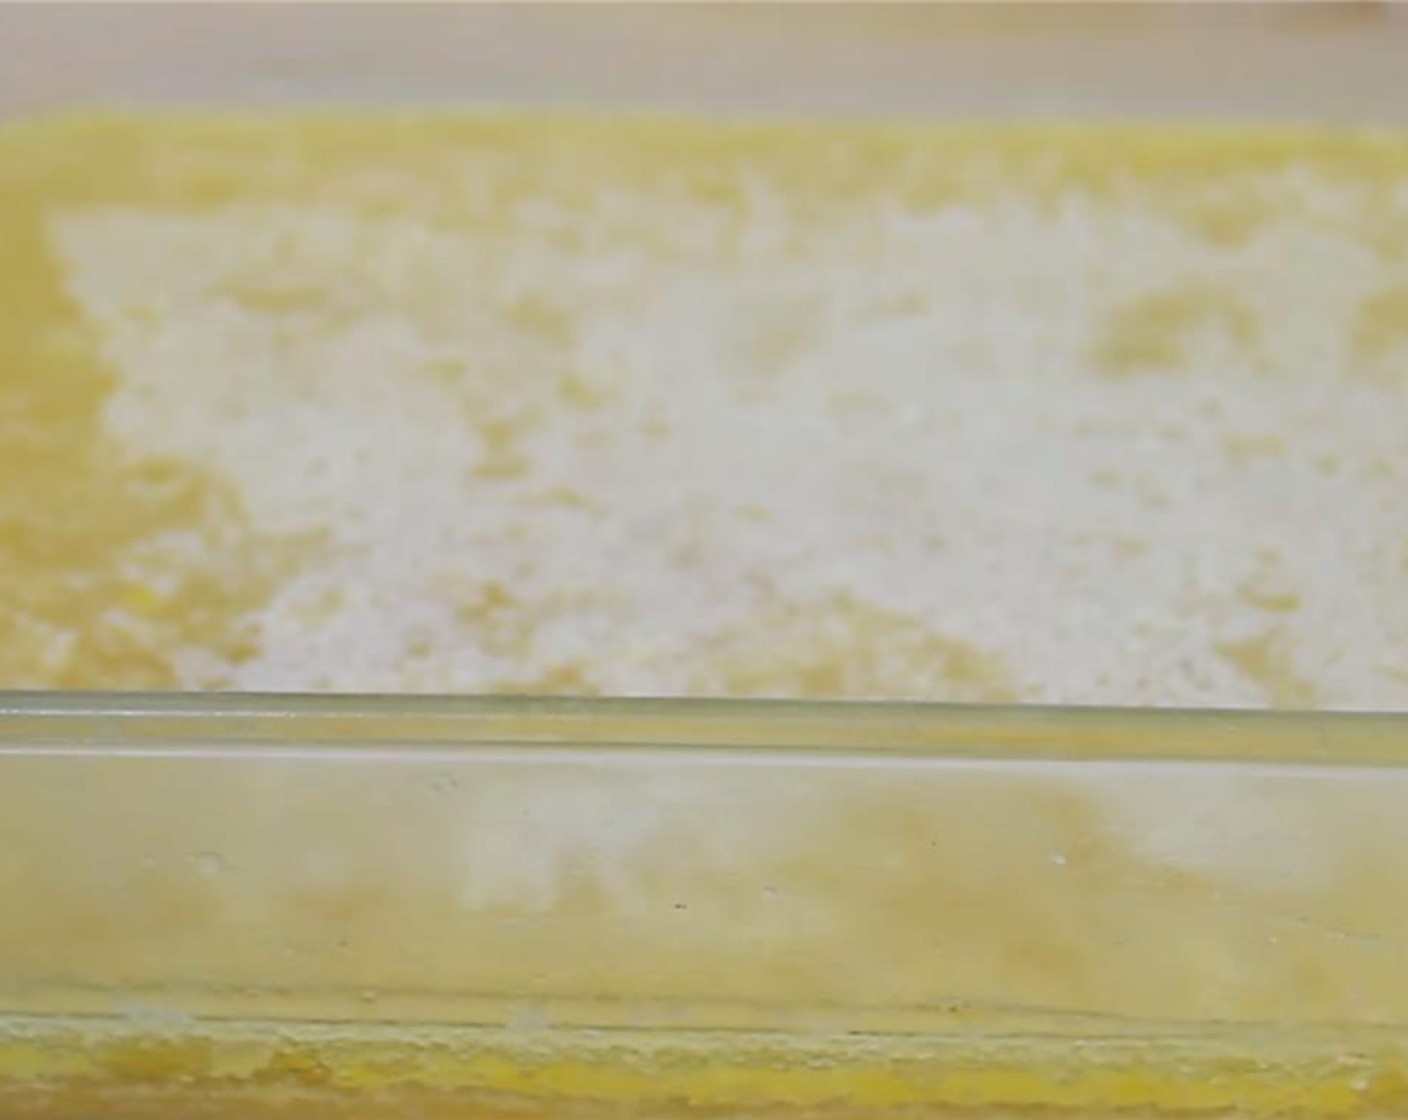 step 9 Take the lemon bars out and set them aside on a wire rack. Remember that the bars will firm up as they cool.